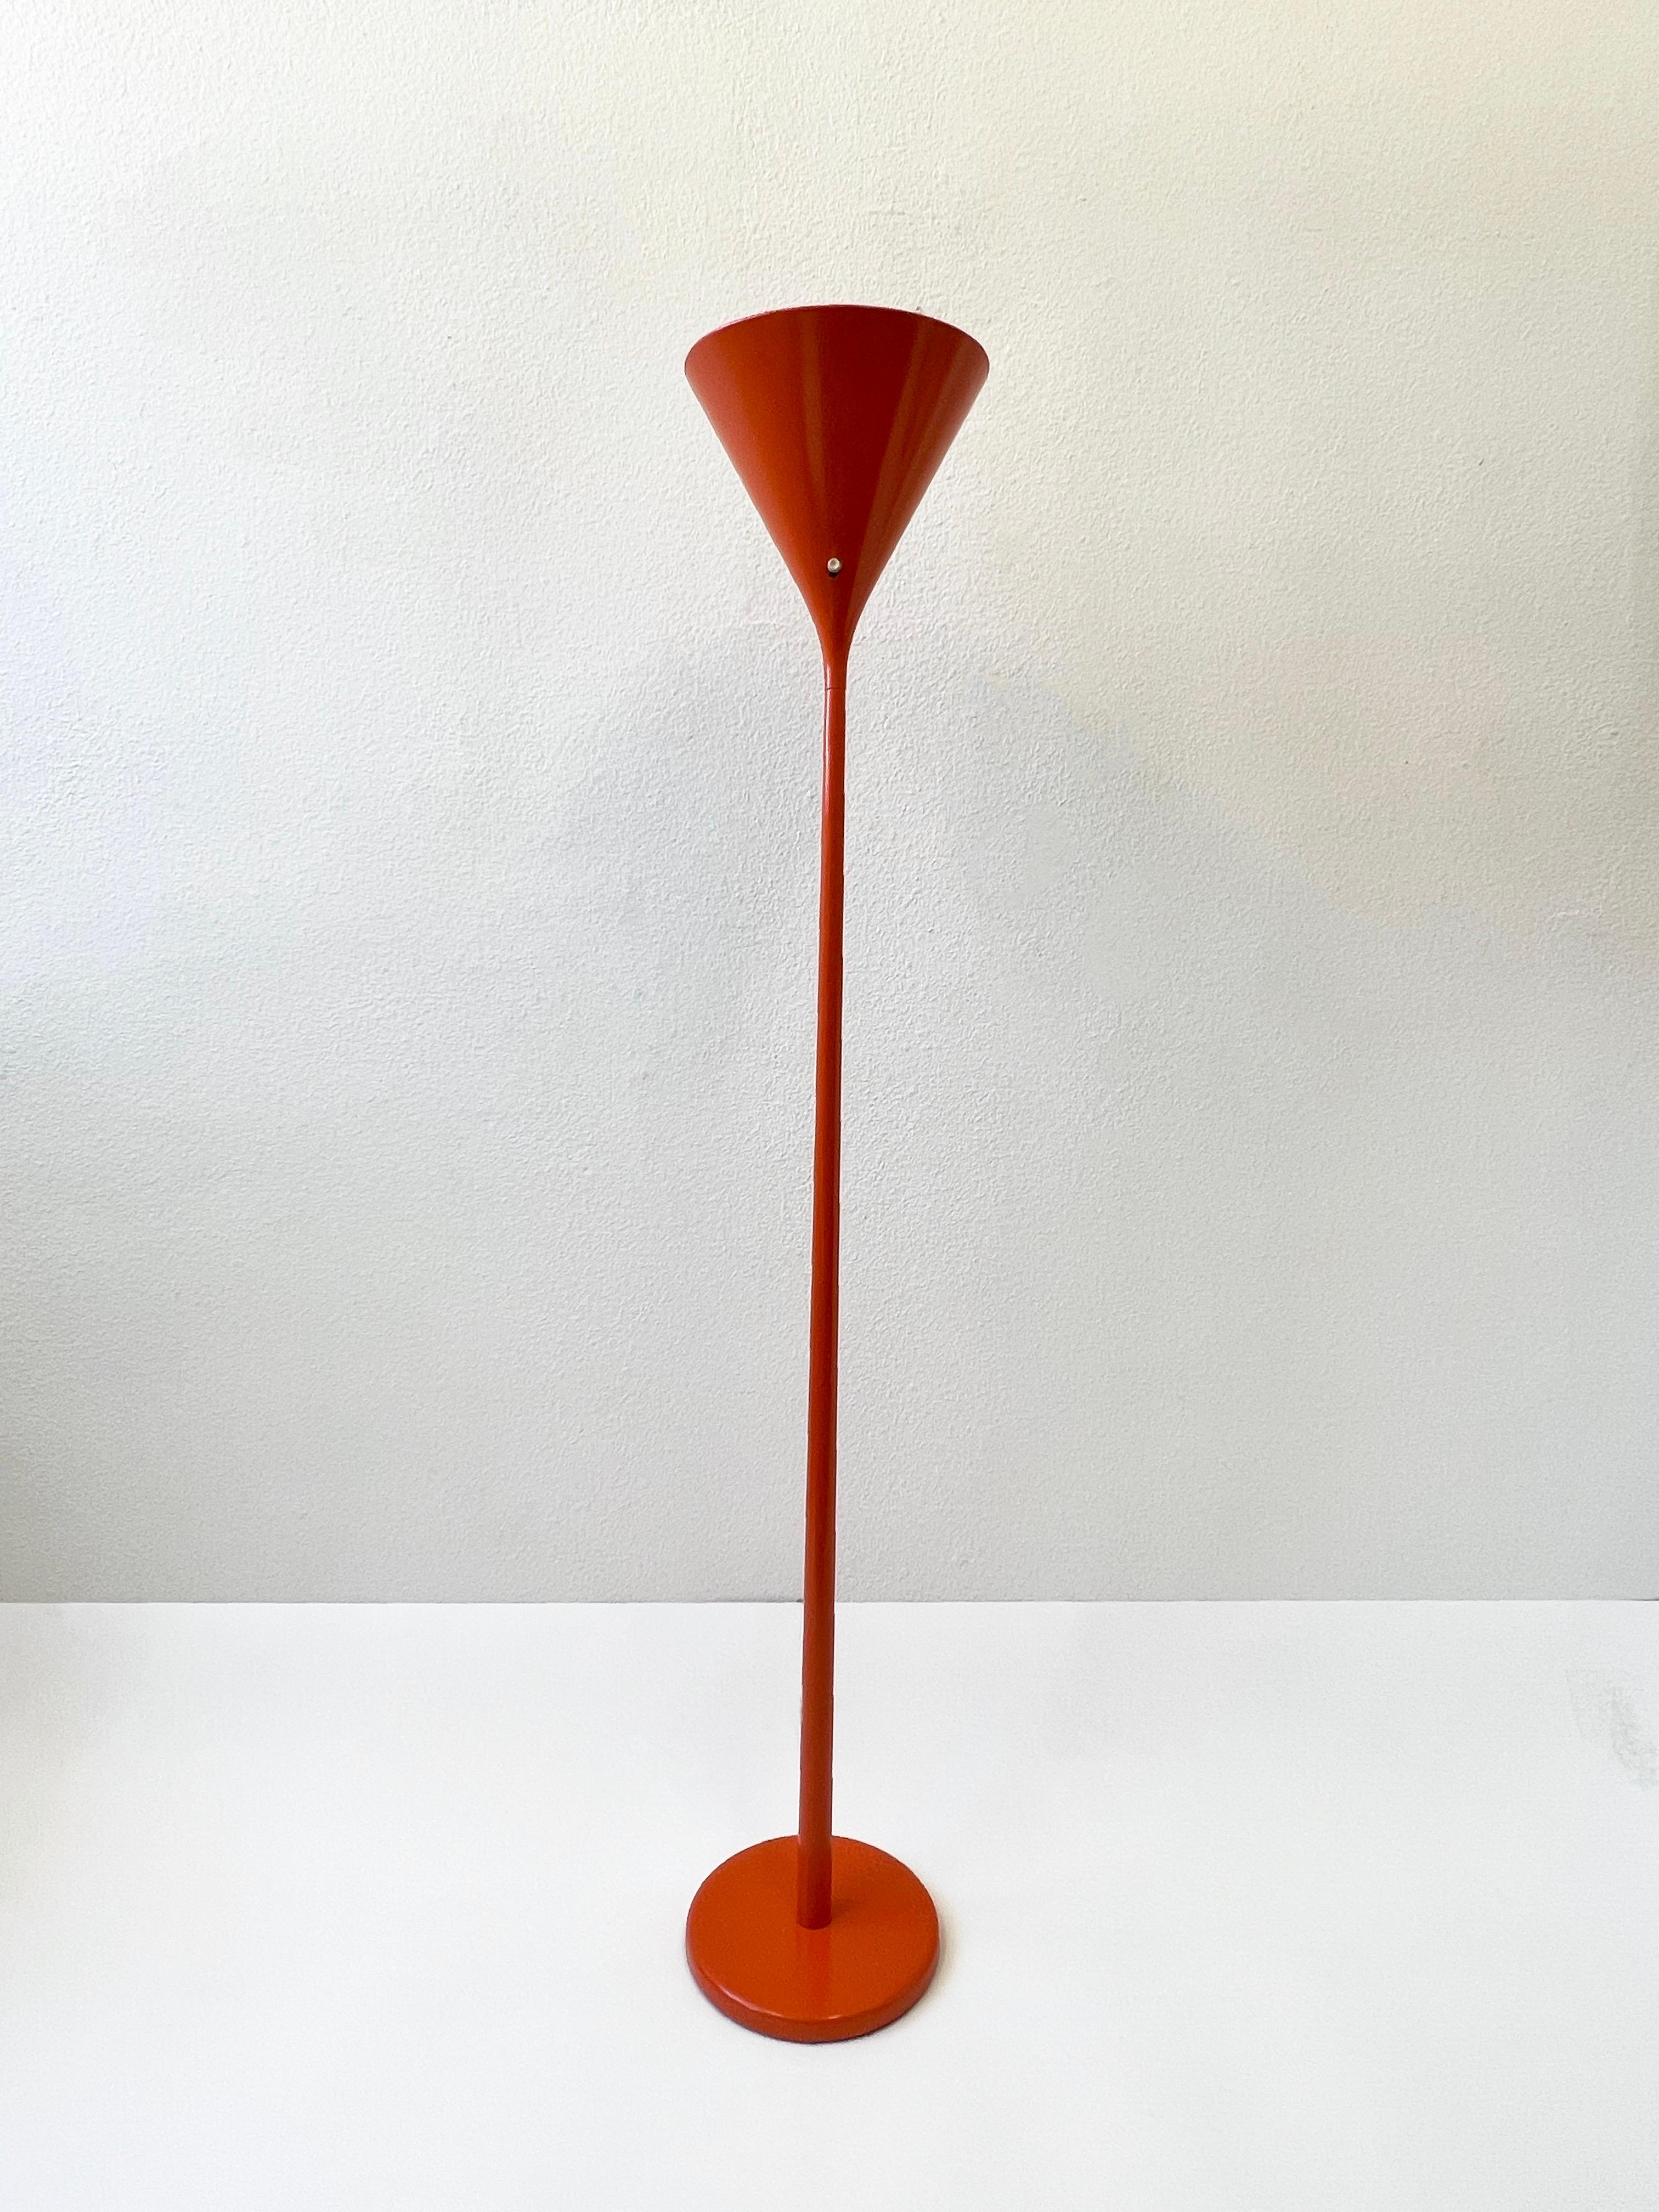 Pair of 1960s orange torchiere floor lamps by Walter Von Nessen. 
Newly powder coated and rewired.
Rotating On/Off switch on shade. 
It takes one 100w Max Edison lightbulb. 

Measurements: 64.5” High, 11.25” Diameter.